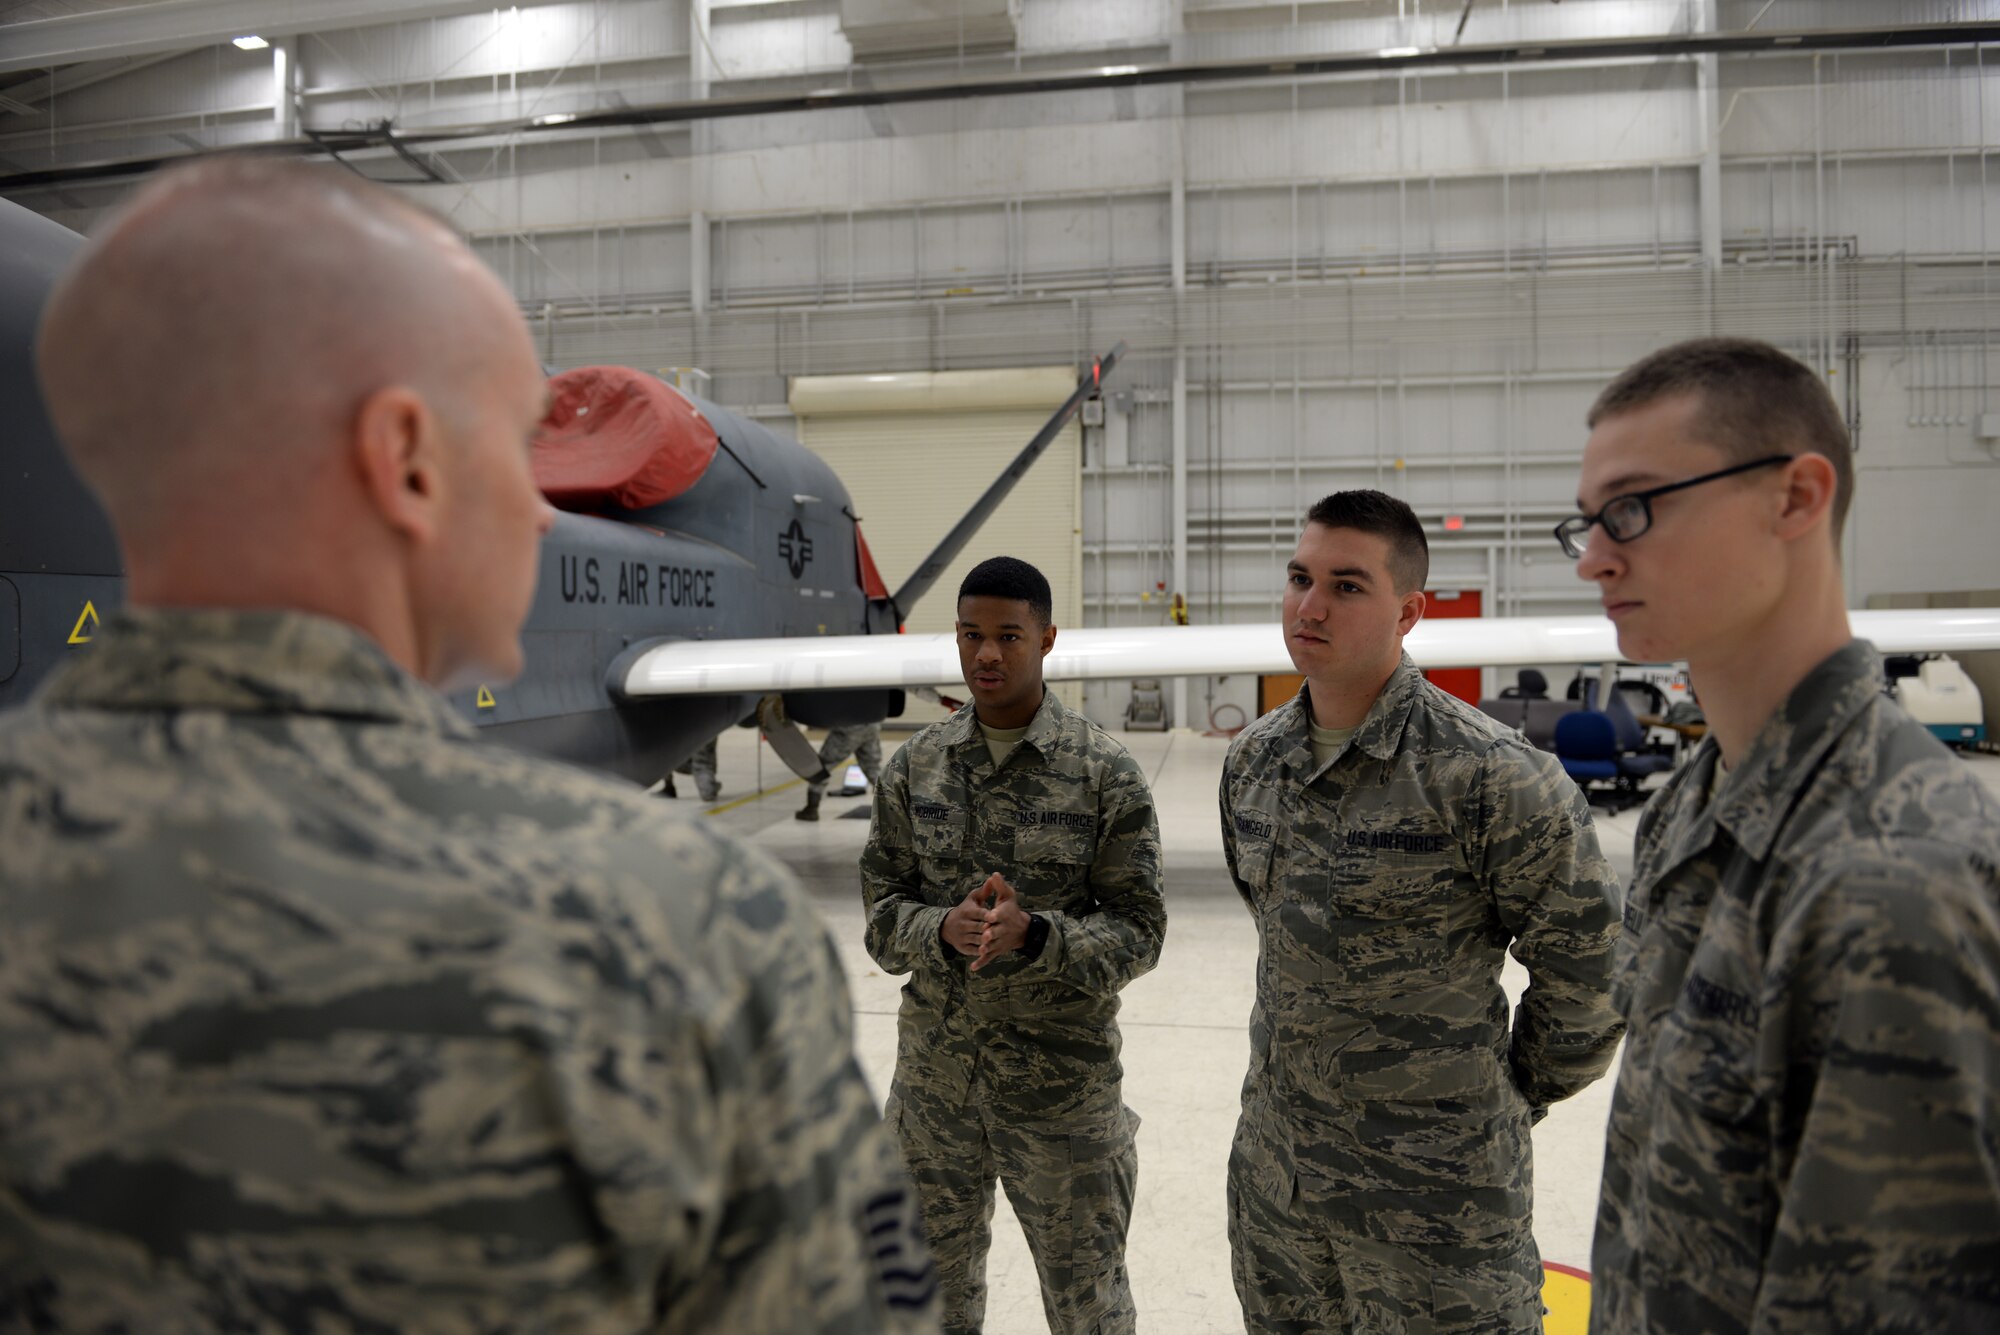 Airmen with the 372nd Training Squadron Detachment 21 receive guidance from Tech. Sgt. Randy Thornsberry Jr., 372nd TRS Detachment 21 maintenance instructor, during a maintenance inspection of an RQ-4 Global Hawk Jan. 20, 2015, at Beale Air Force Base, Calif. The Airmen are the first students to attend the RQ-4 remotely piloted aircraft maintenance course taught at Beale. (U.S. Air Force photo by Senior Airman Bobby Cummings/Released)